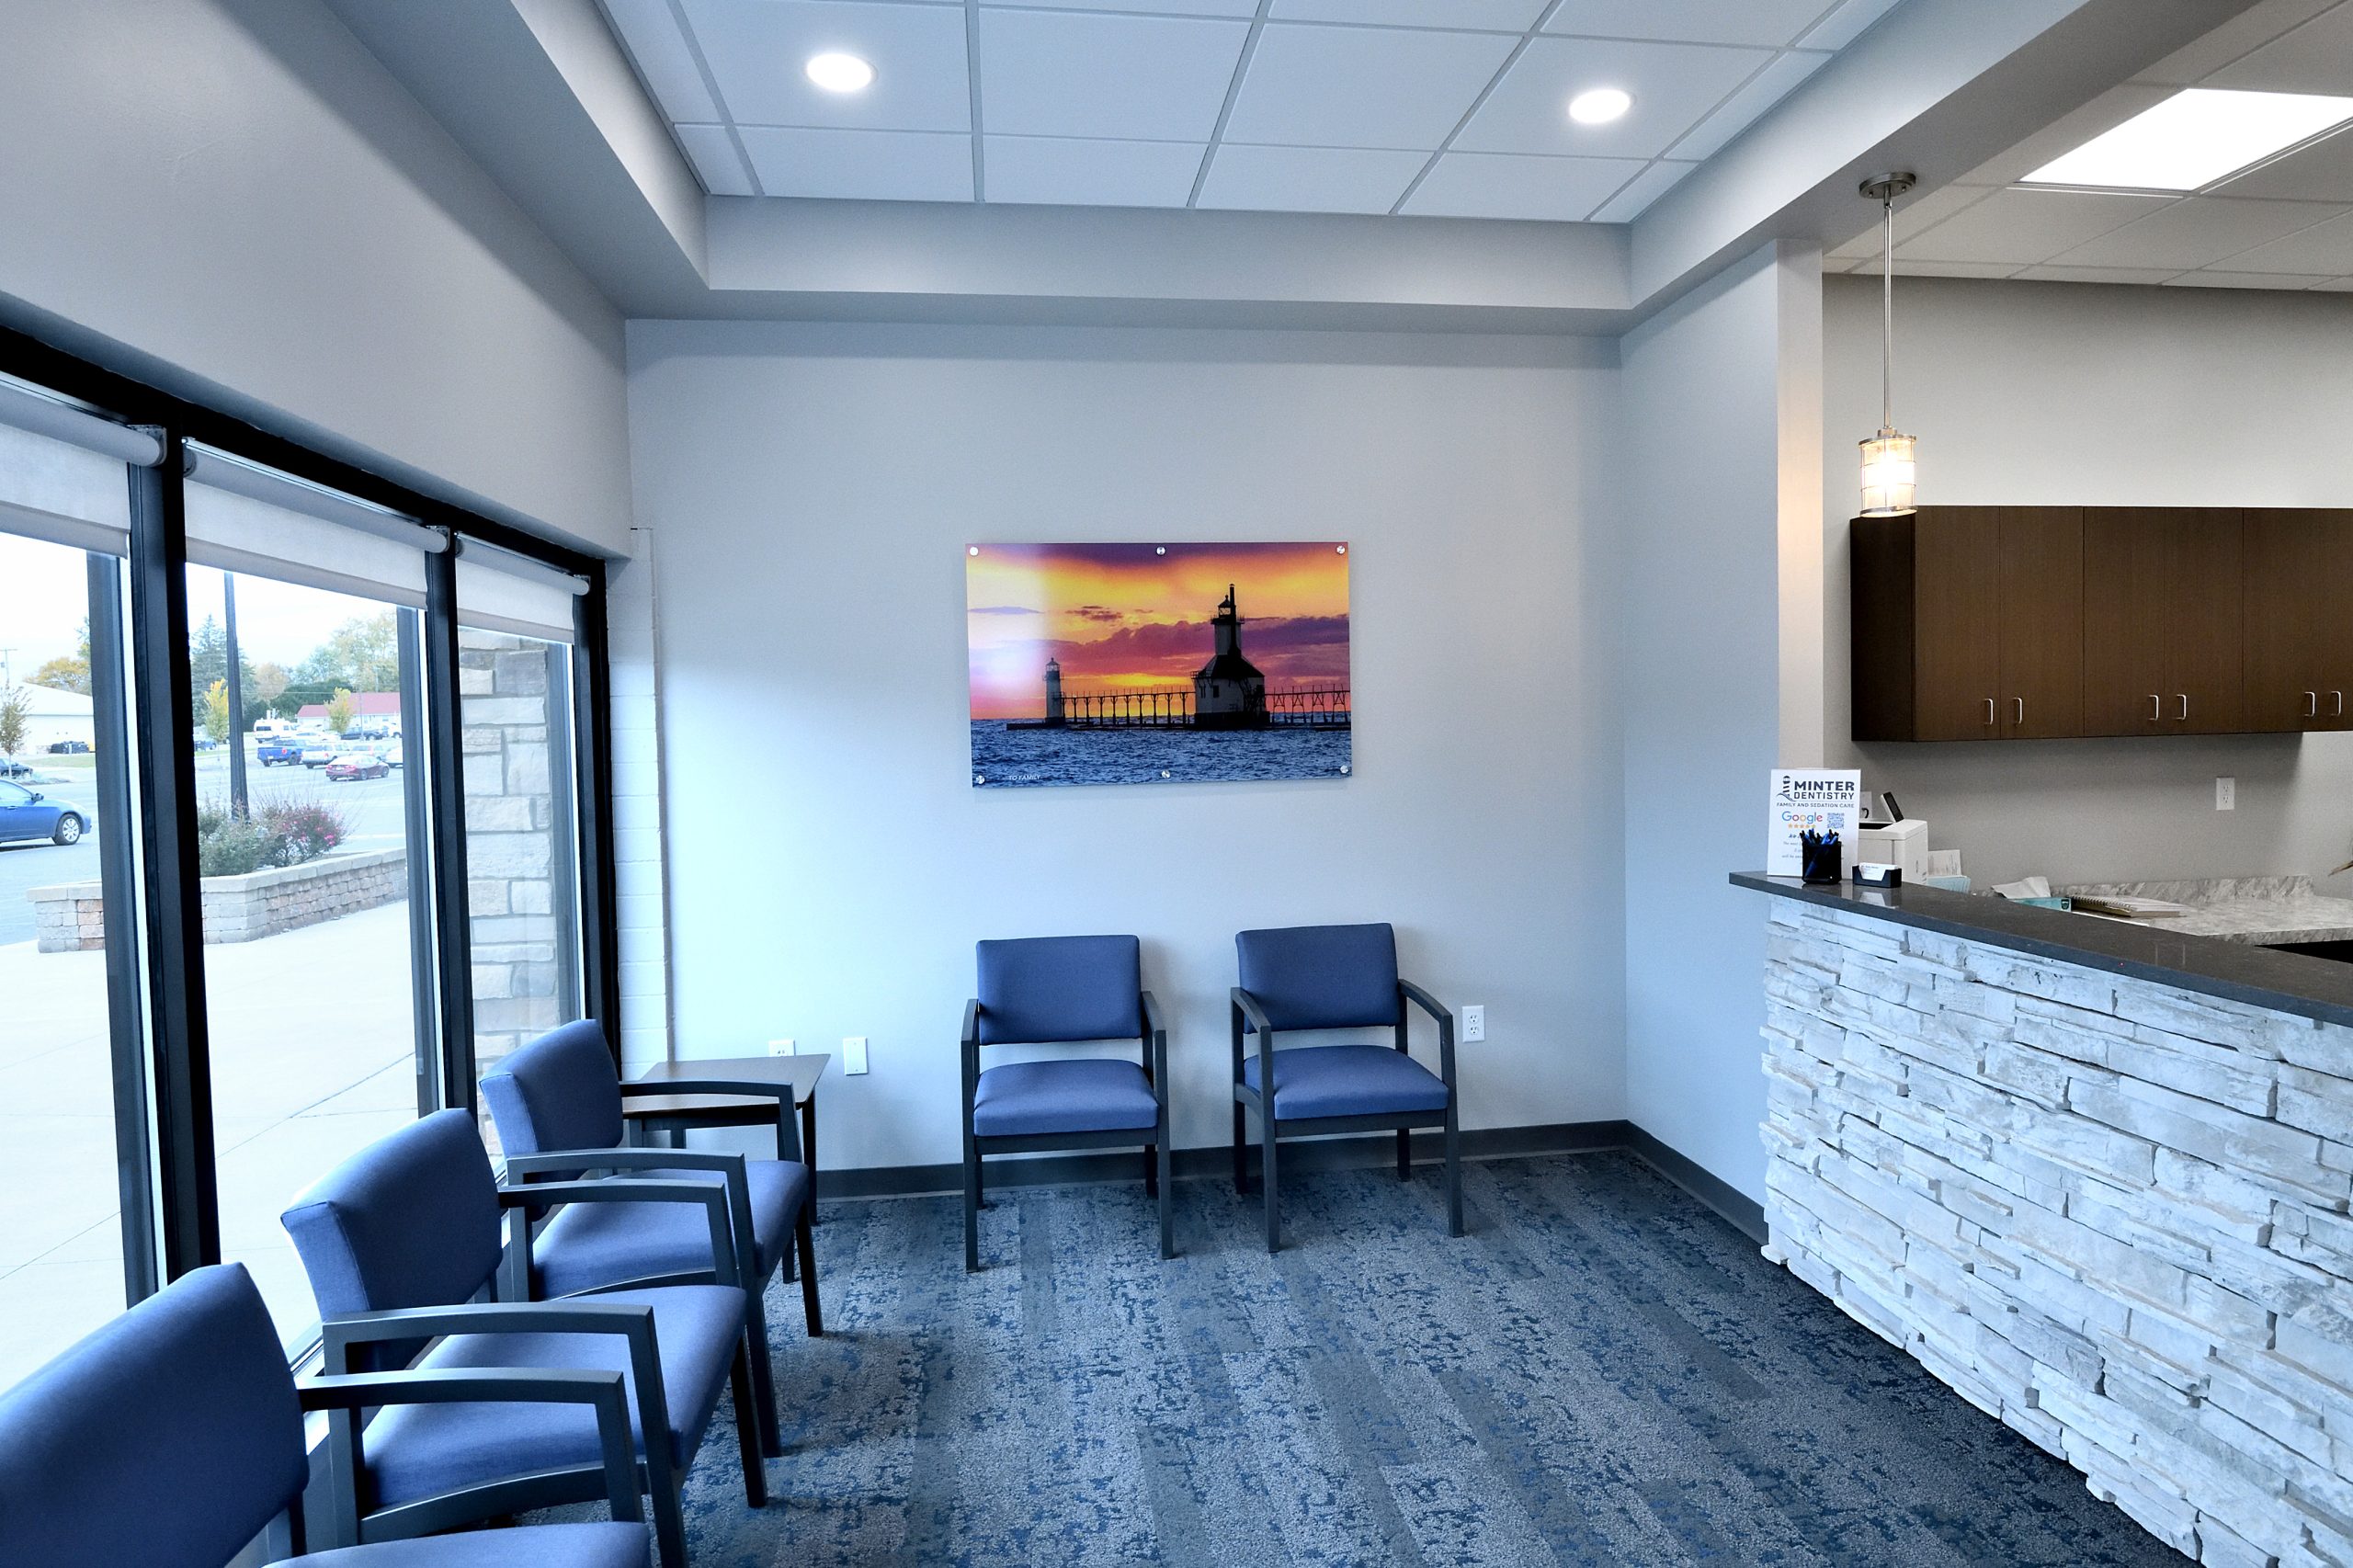 General Dentistry office in Canton, OH